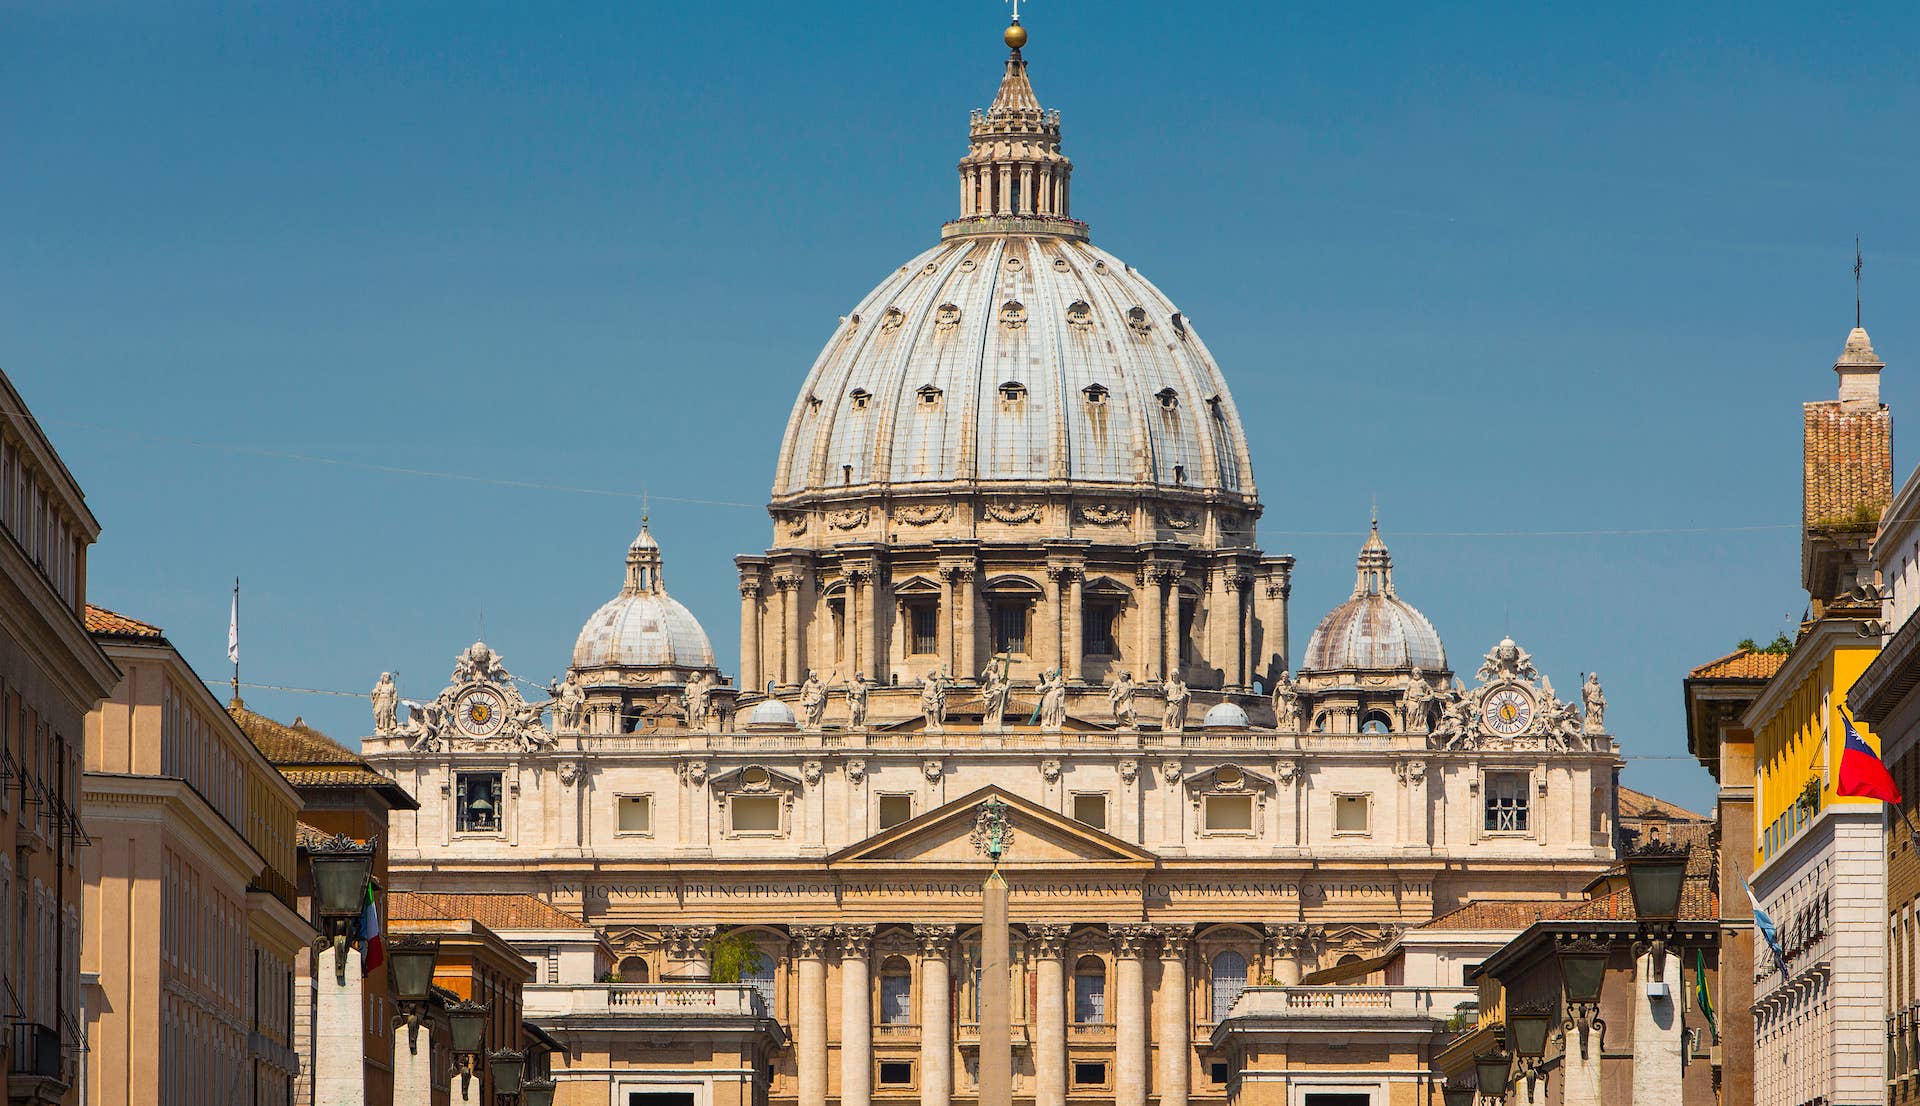 Vatican featuring St. Peter's Basilica, Rome, Italy